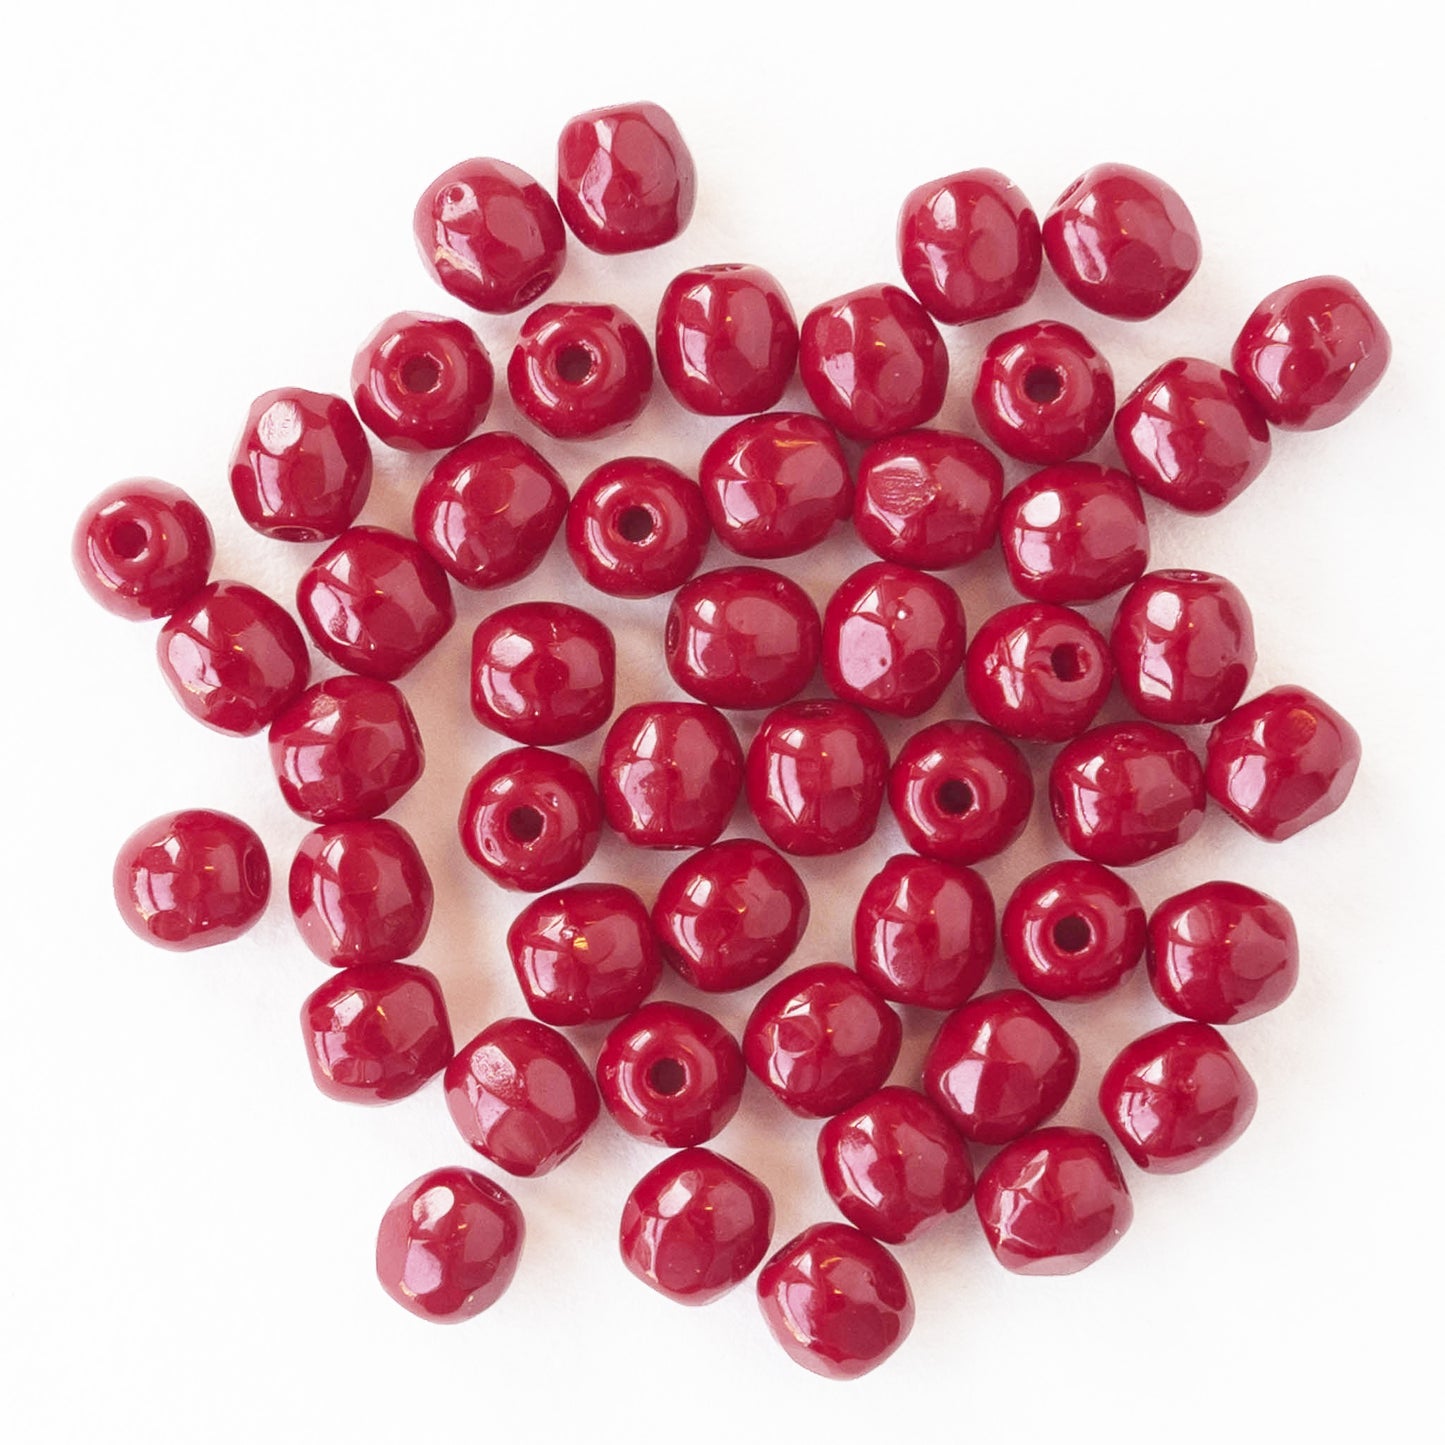 4mm Faceted Round Beads - Opaque Red - 50 beads